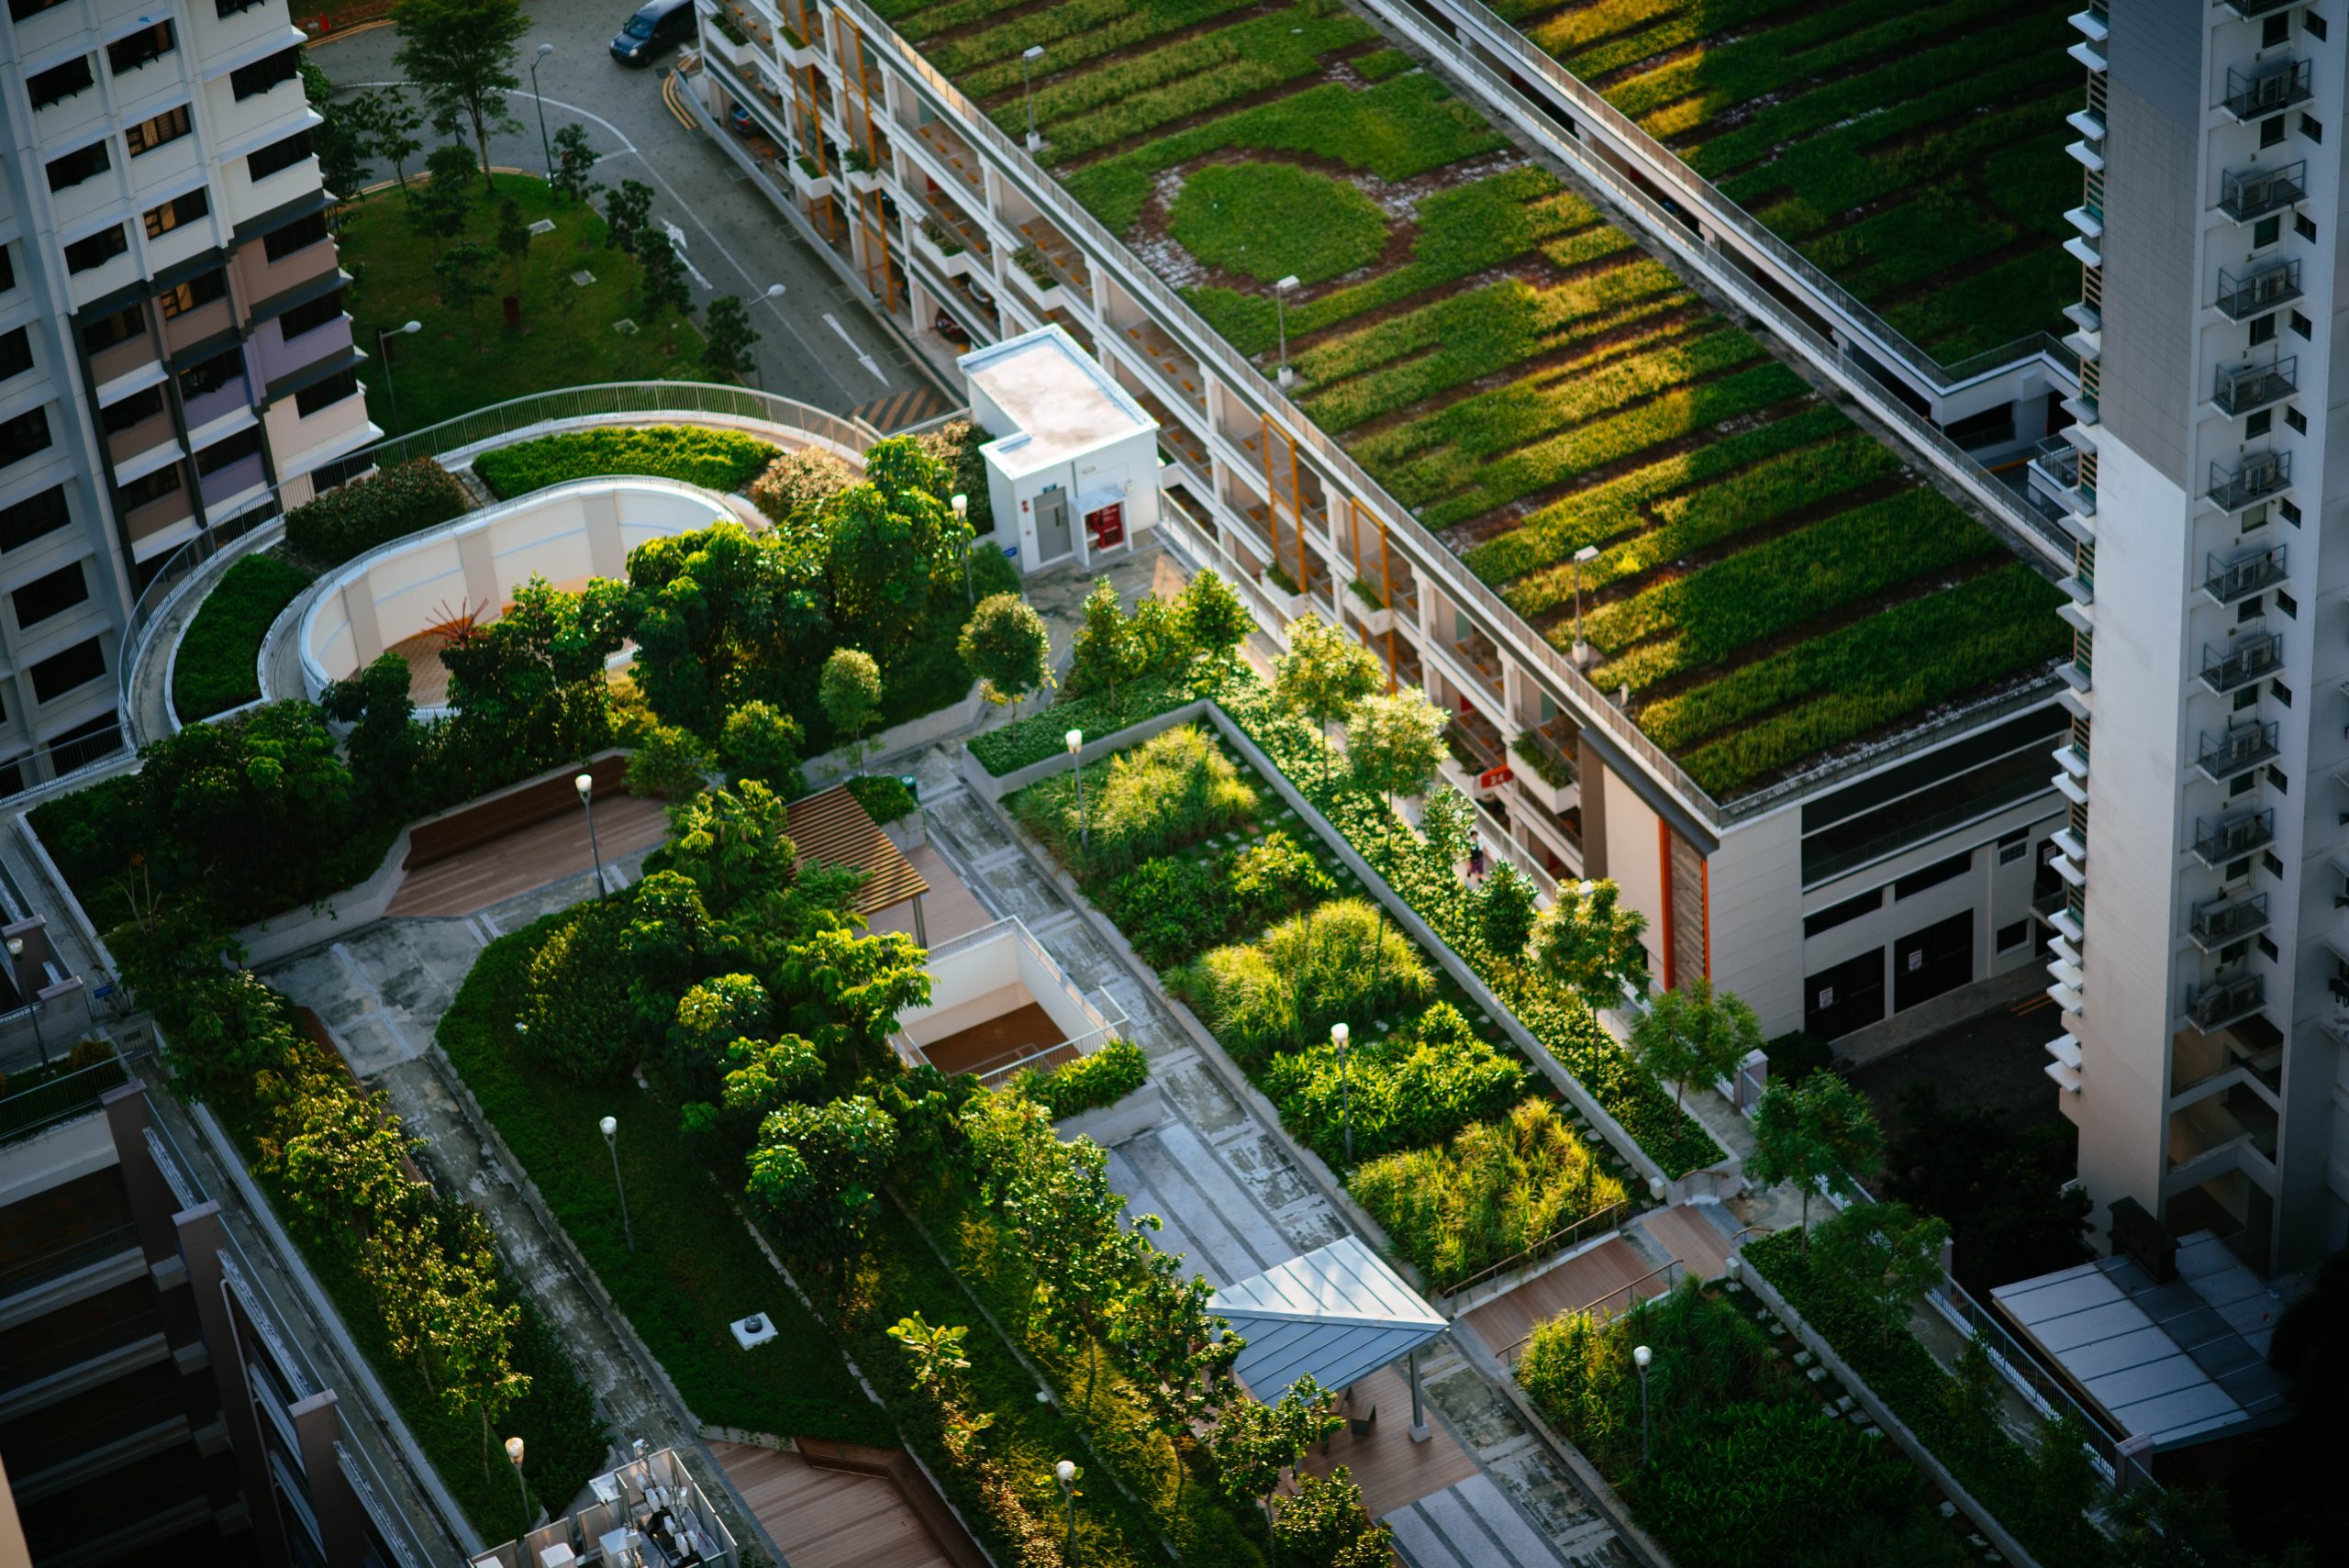 Apartment rooftops with green gardens and a ray of sun.